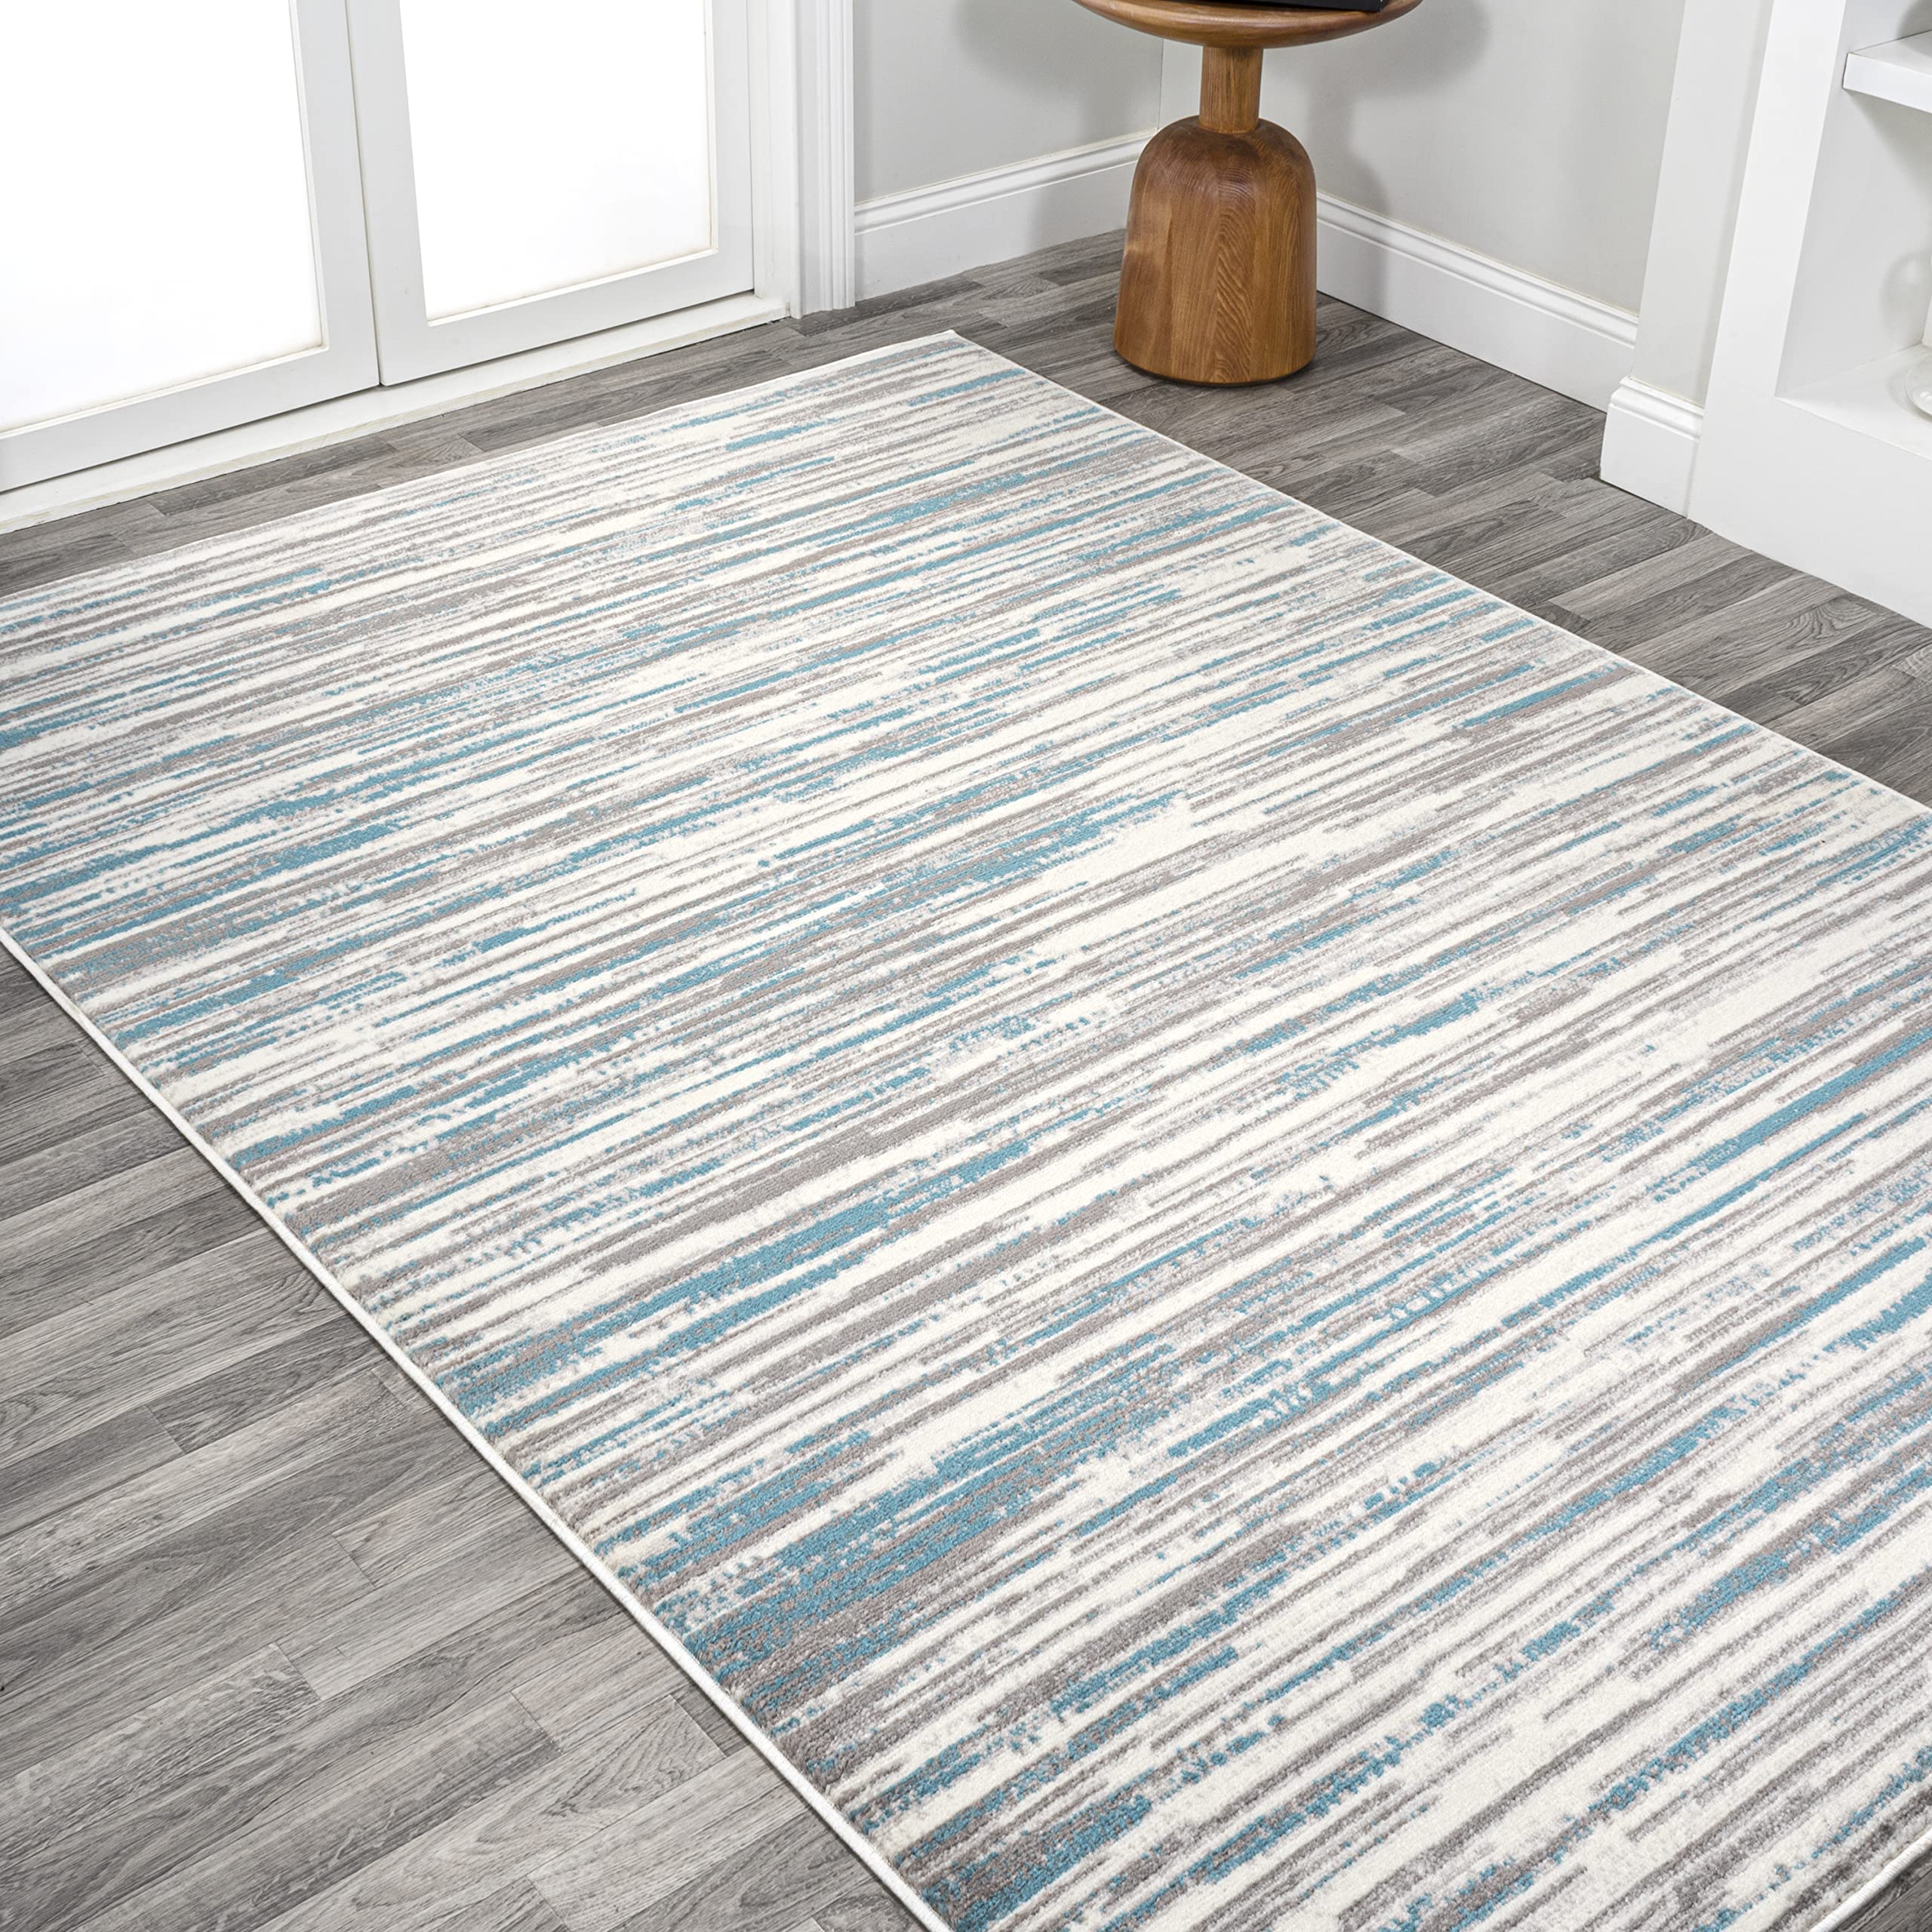 JONATHAN Y LUX106A-3 Speer Abstract Linear Stripe Indoor Area -Rug, Contemporary, Rustic, Coastal Easy -Cleaning,Bedroom,Kitchen,Living Room,Non Shedding, Gray/Blue, 3 X 5